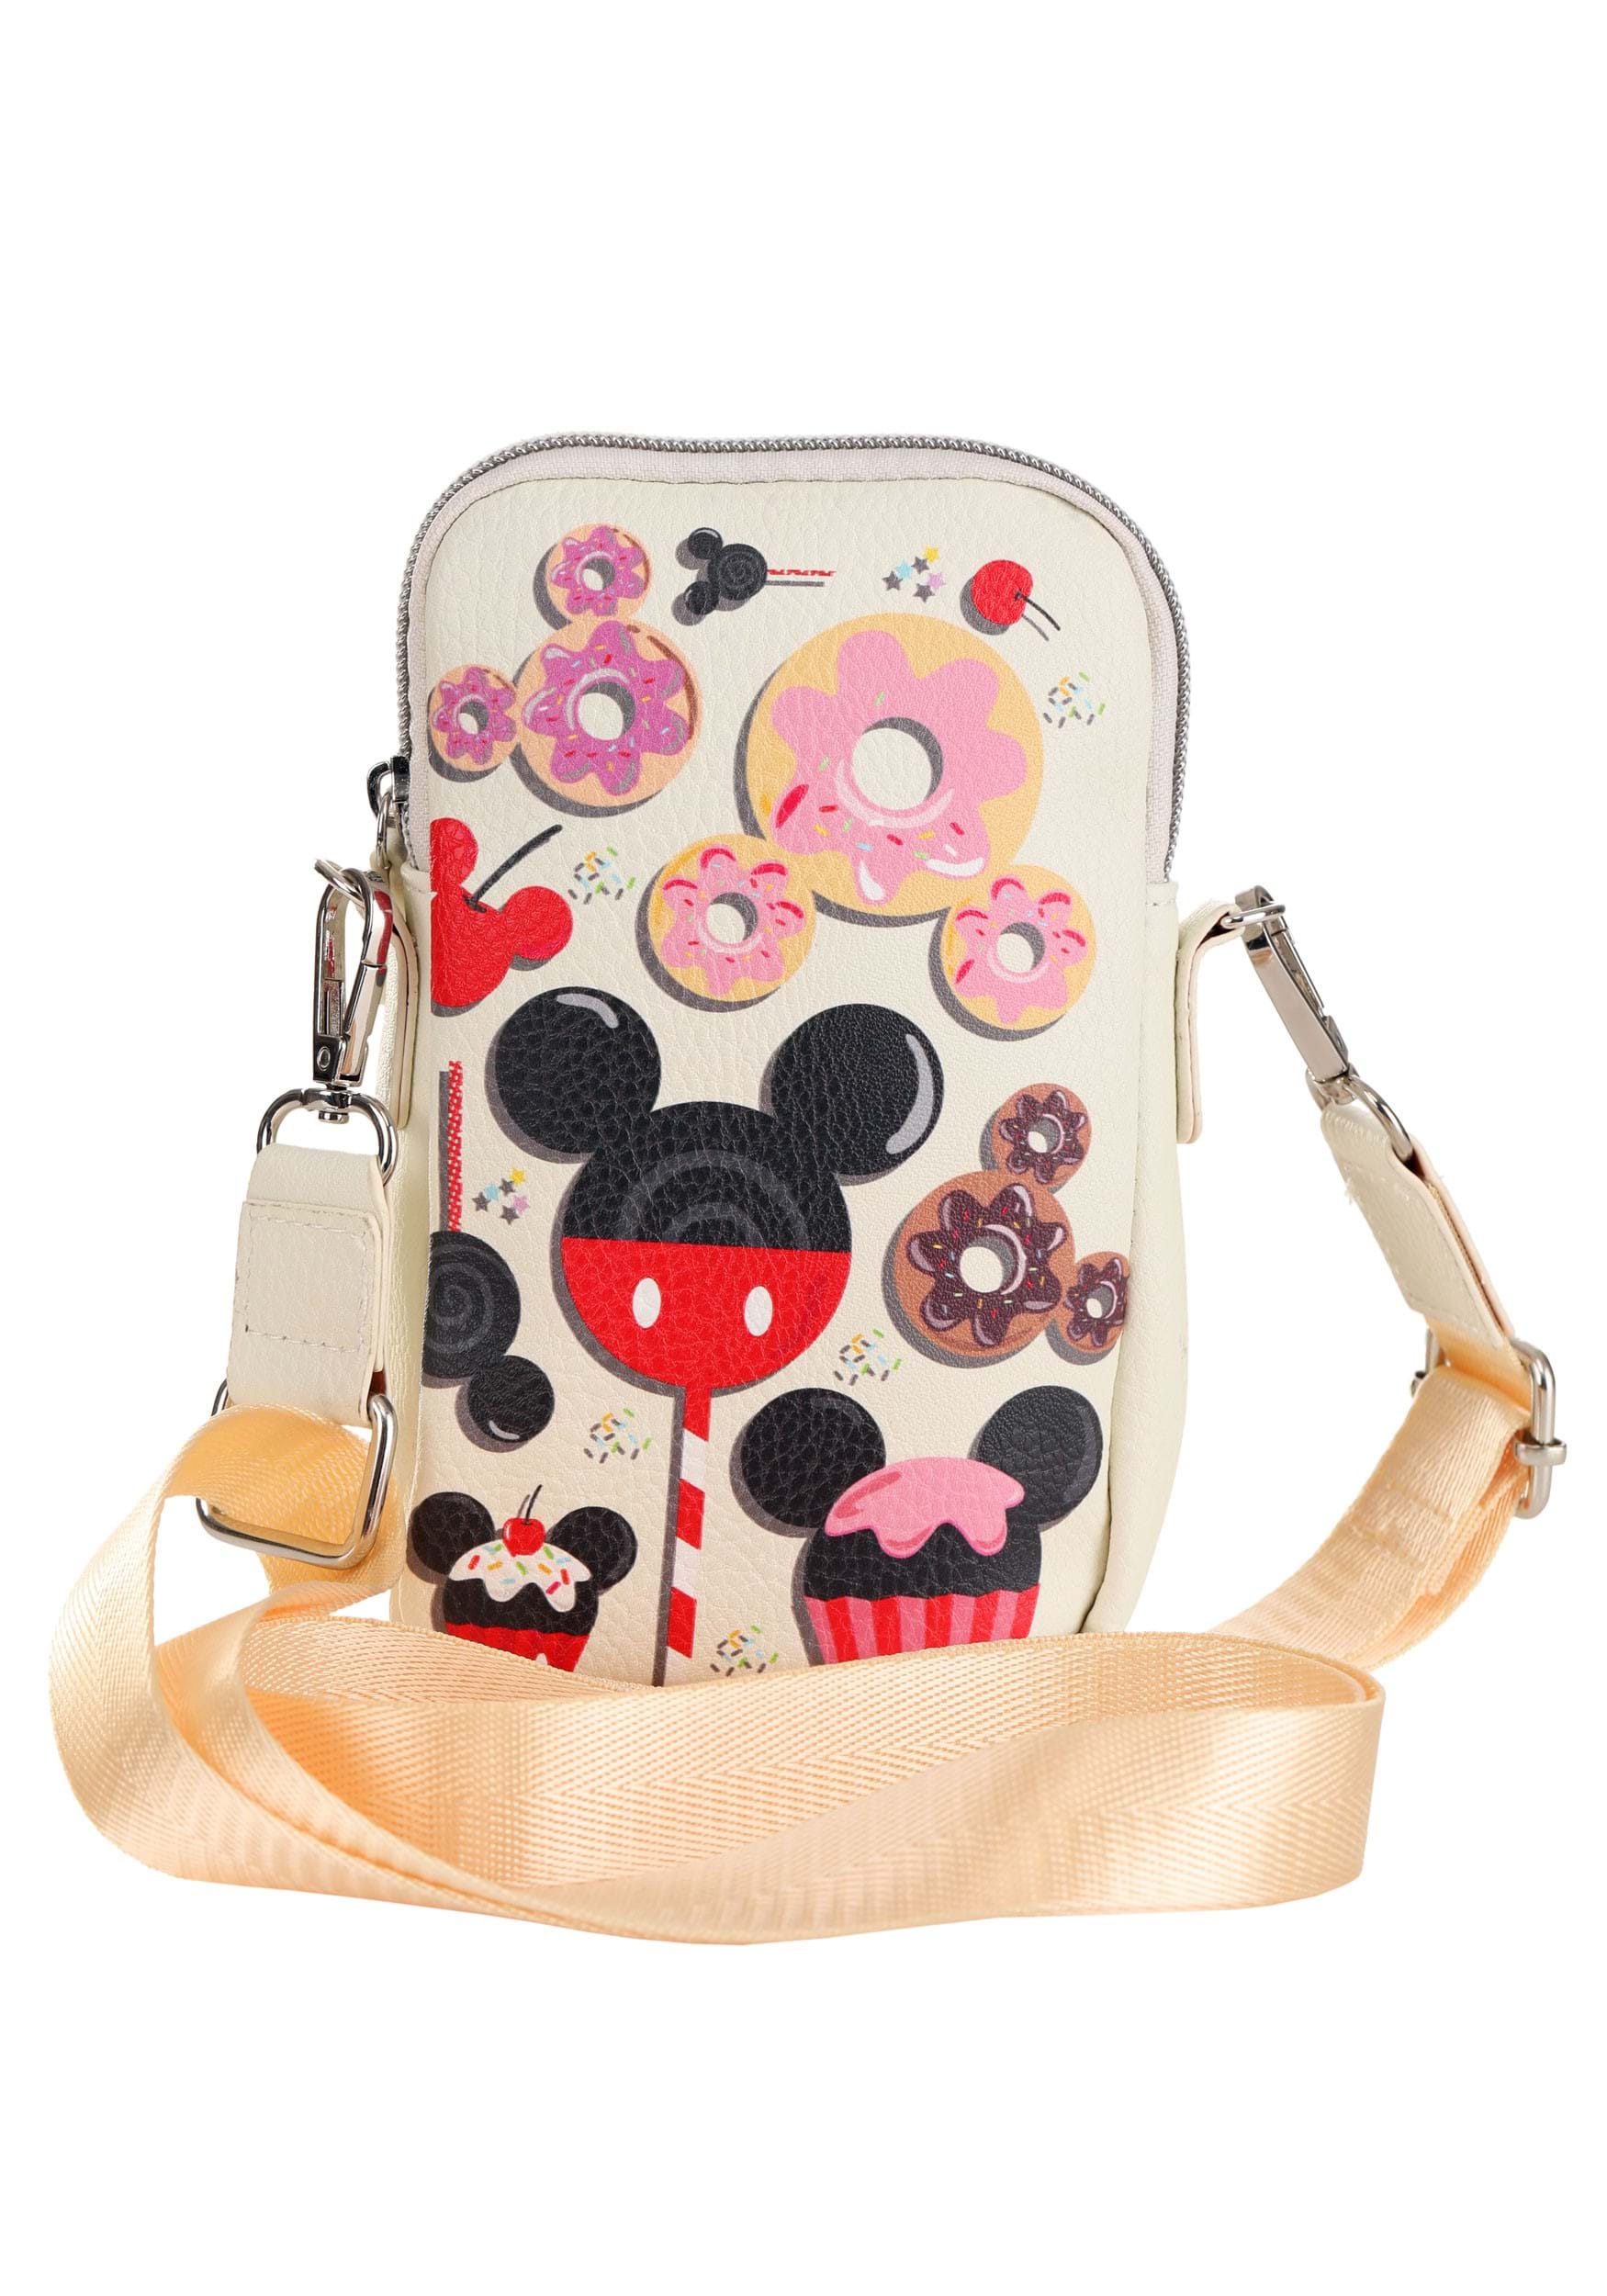 Disney Designer Crossbody Tote Bag - Minnie Mouse Silhouette Floral Bow